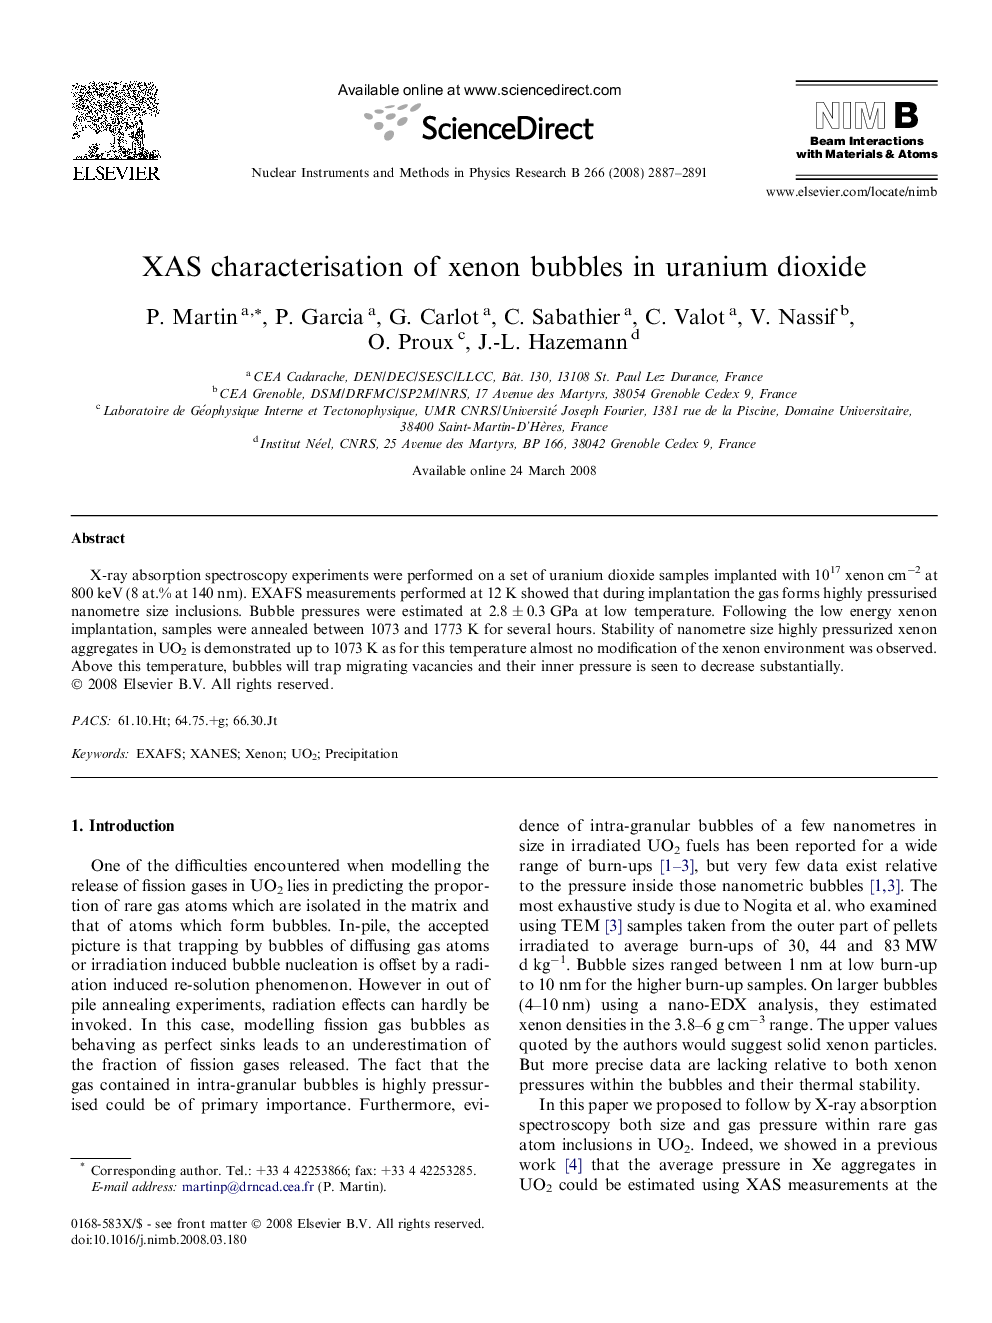 XAS characterisation of xenon bubbles in uranium dioxide